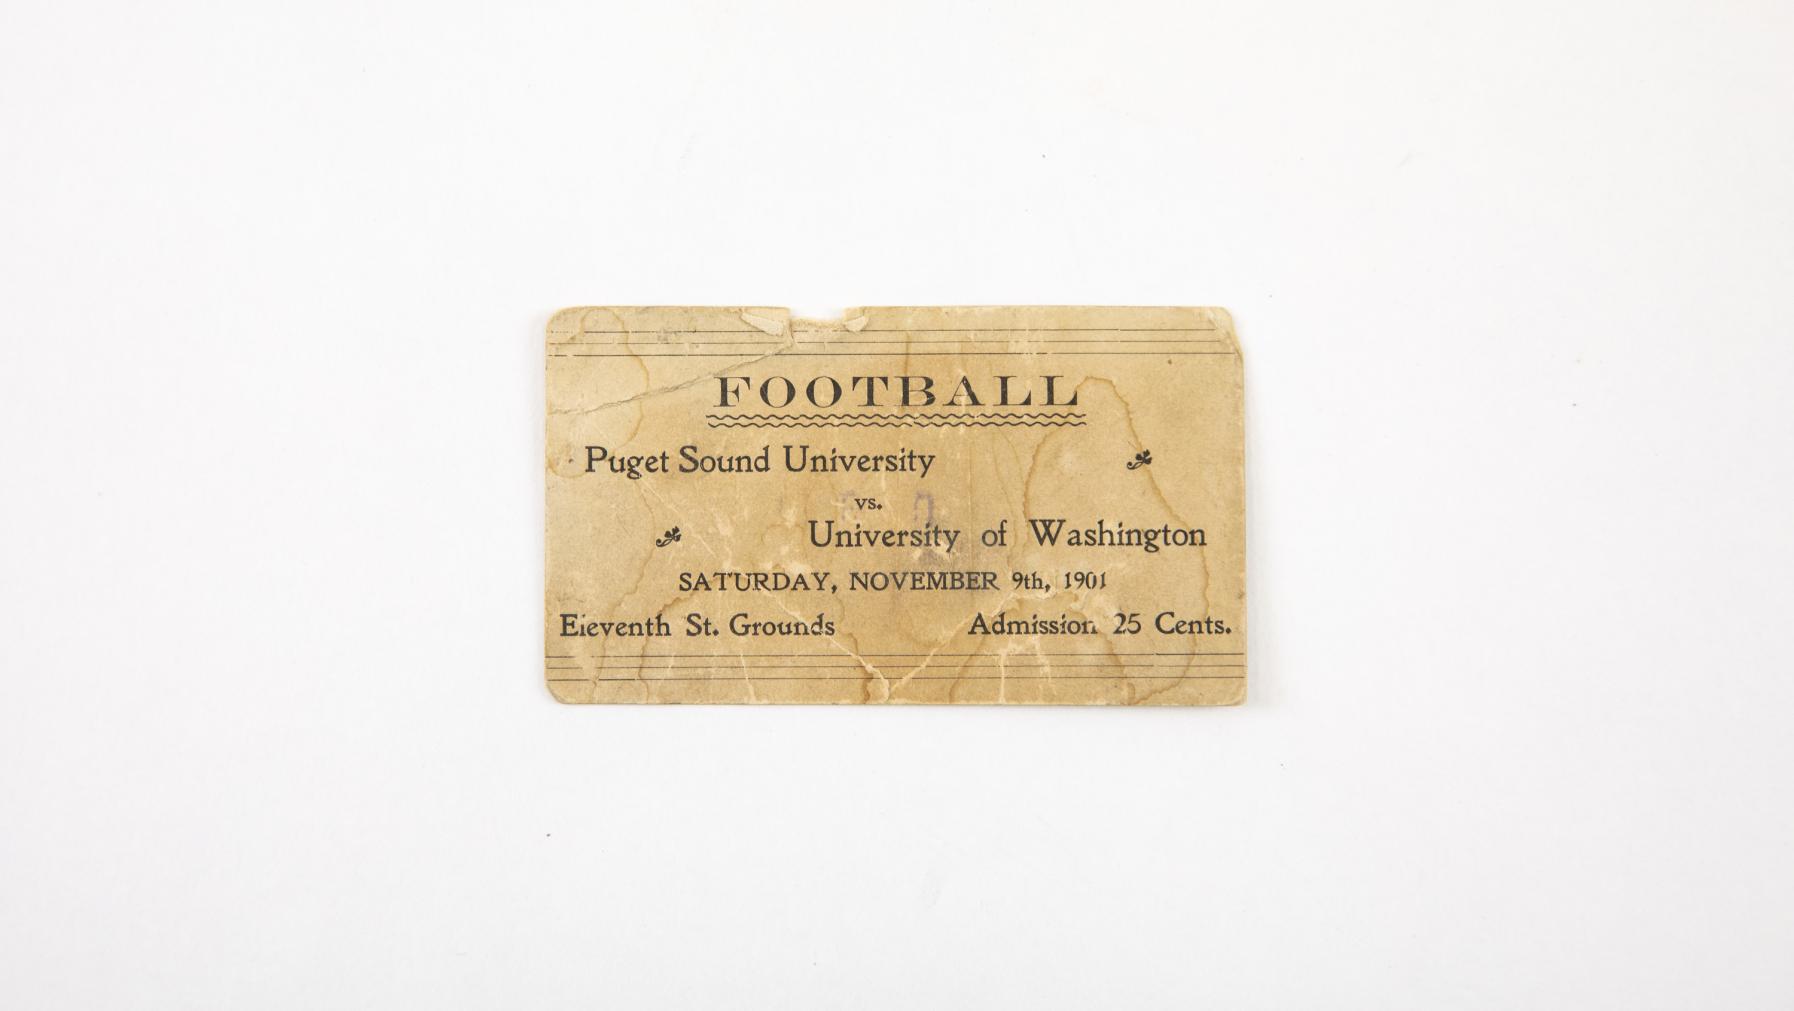 Paper ticket for a Puget Sound University football game in 1901 vs. University of Washington. Admission was 25 cents.